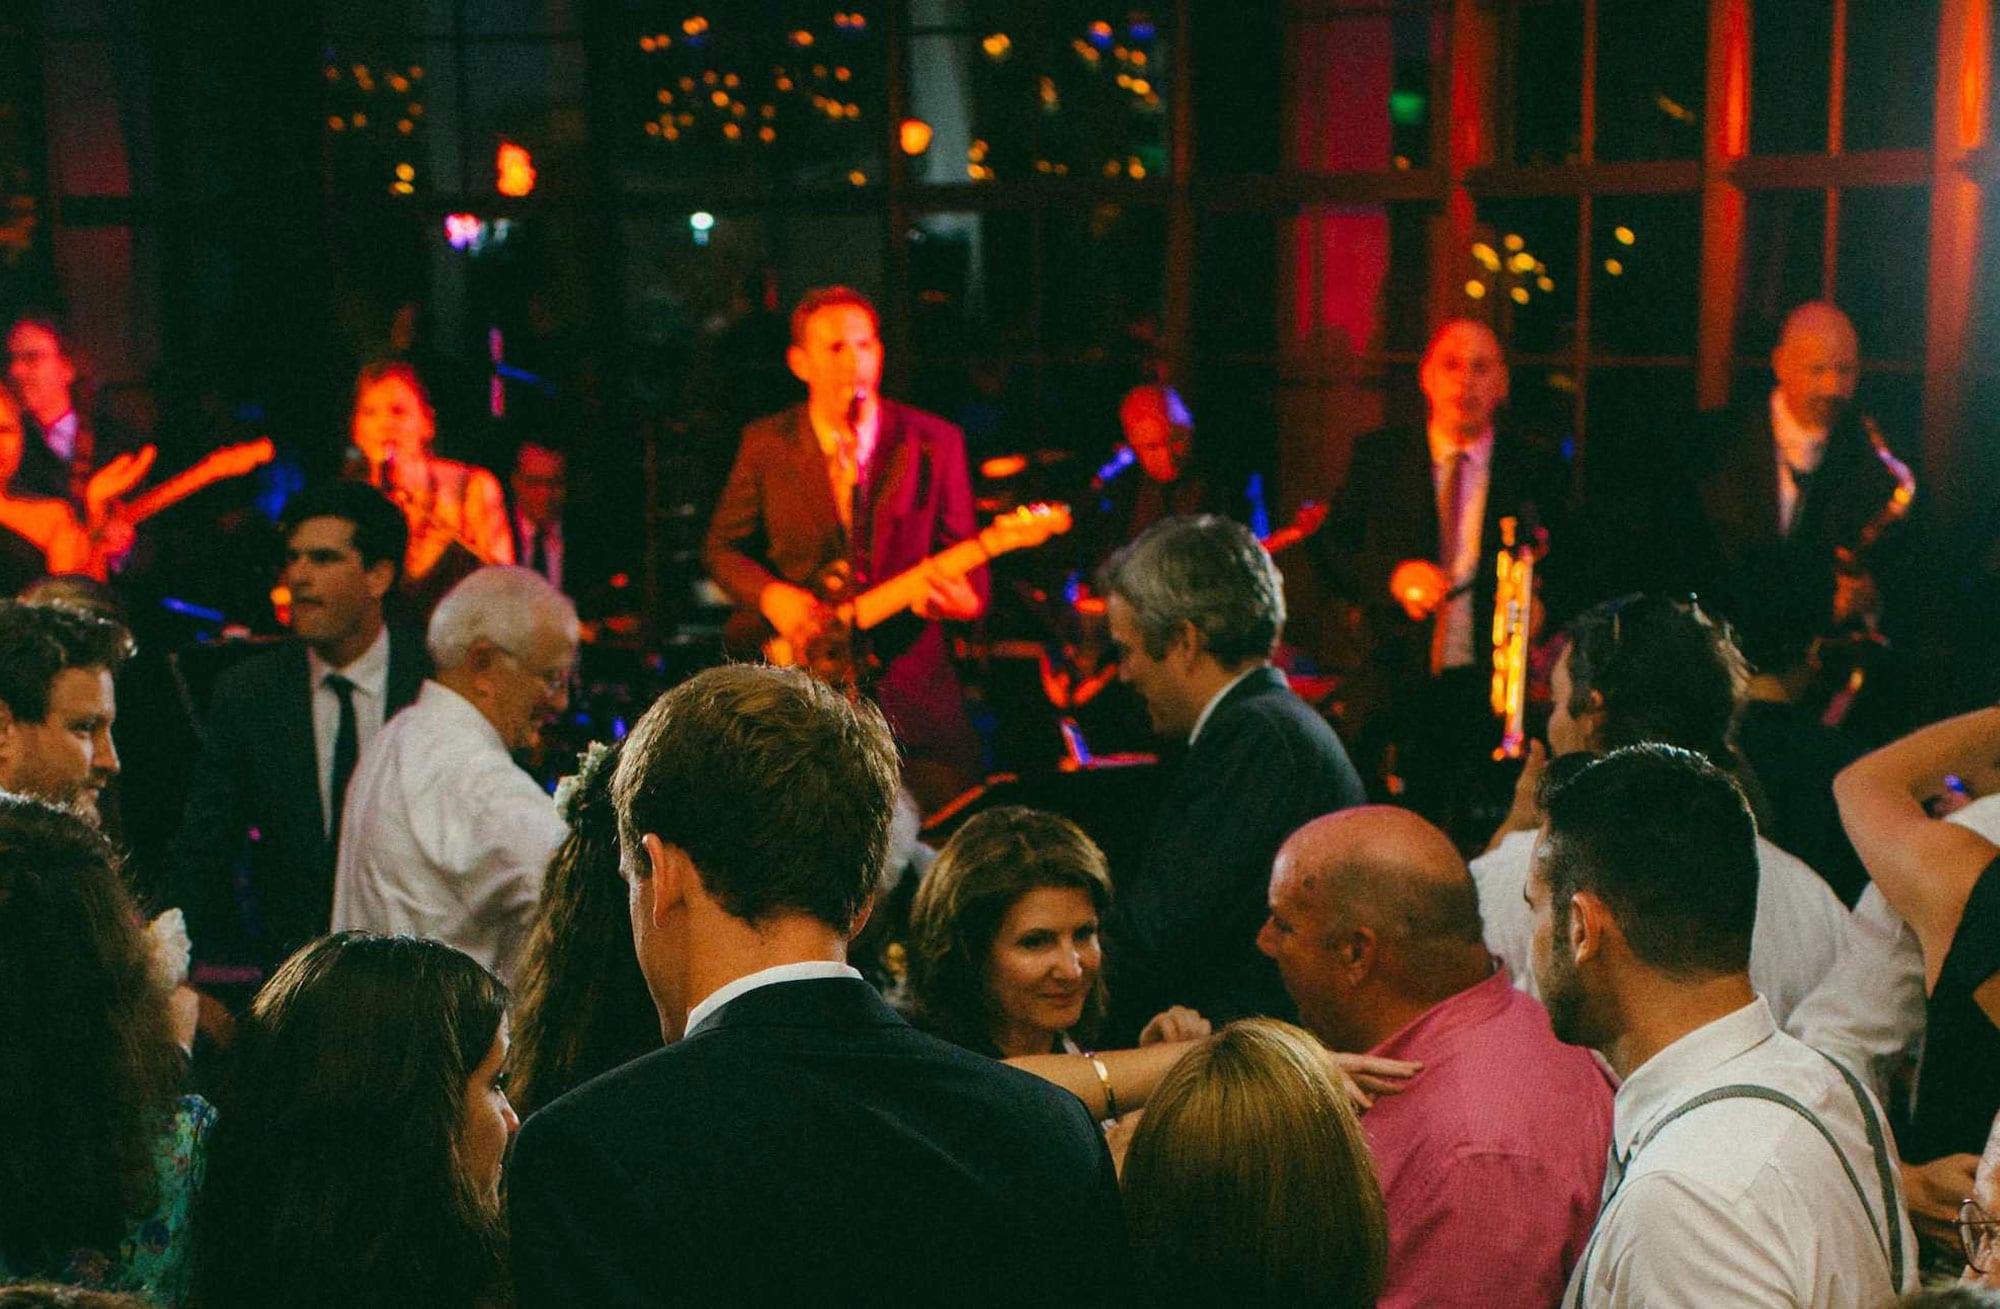 Loyales performing in front of a crowd at an NYC wedding